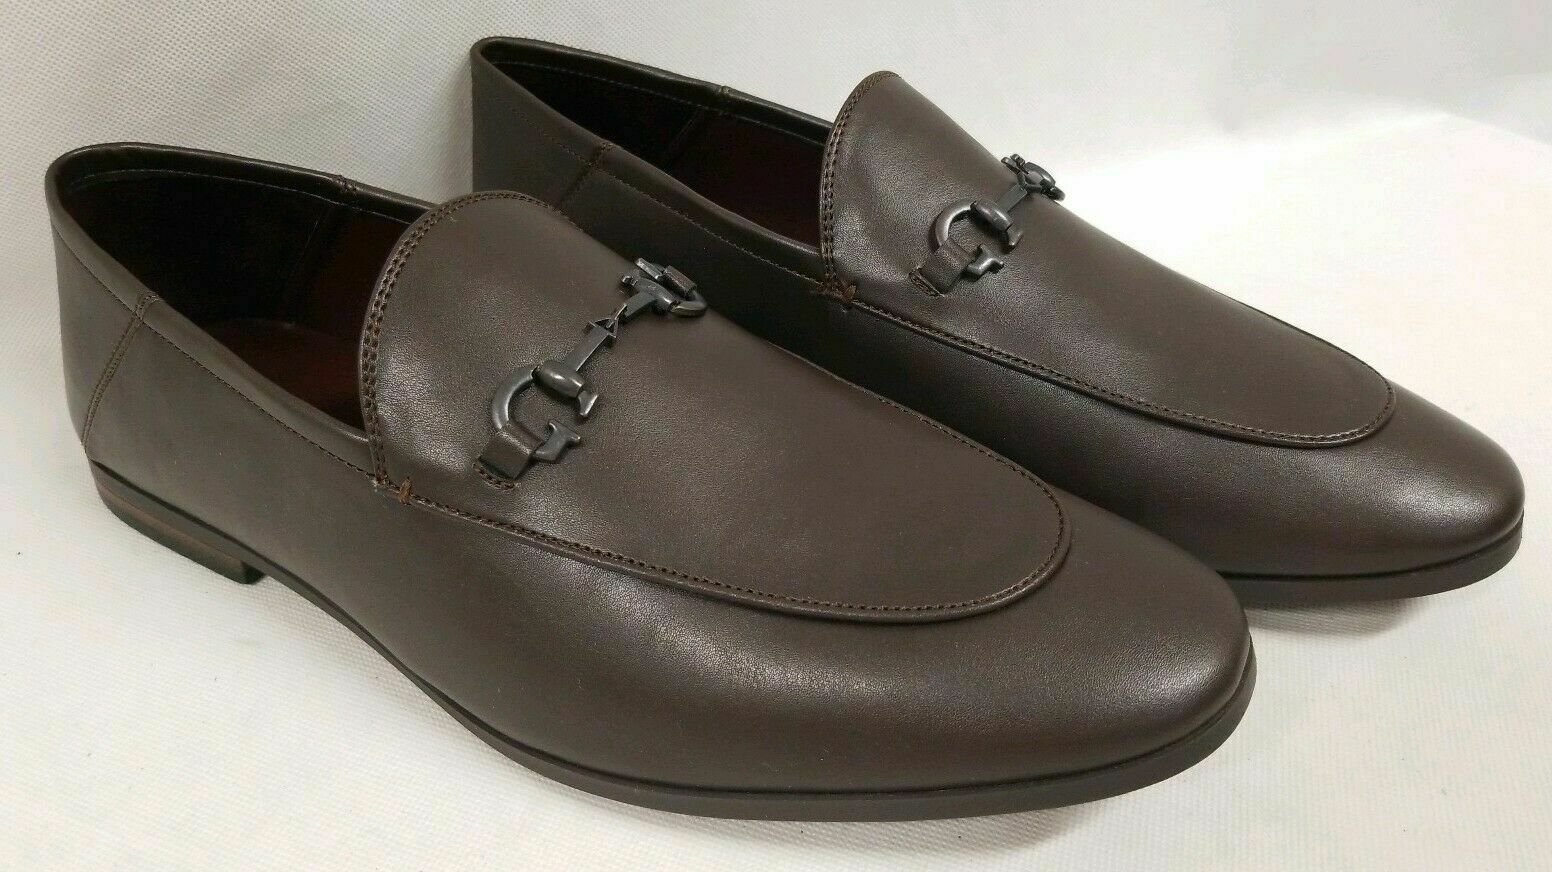 GUESS Mens Edwin2 Loafer